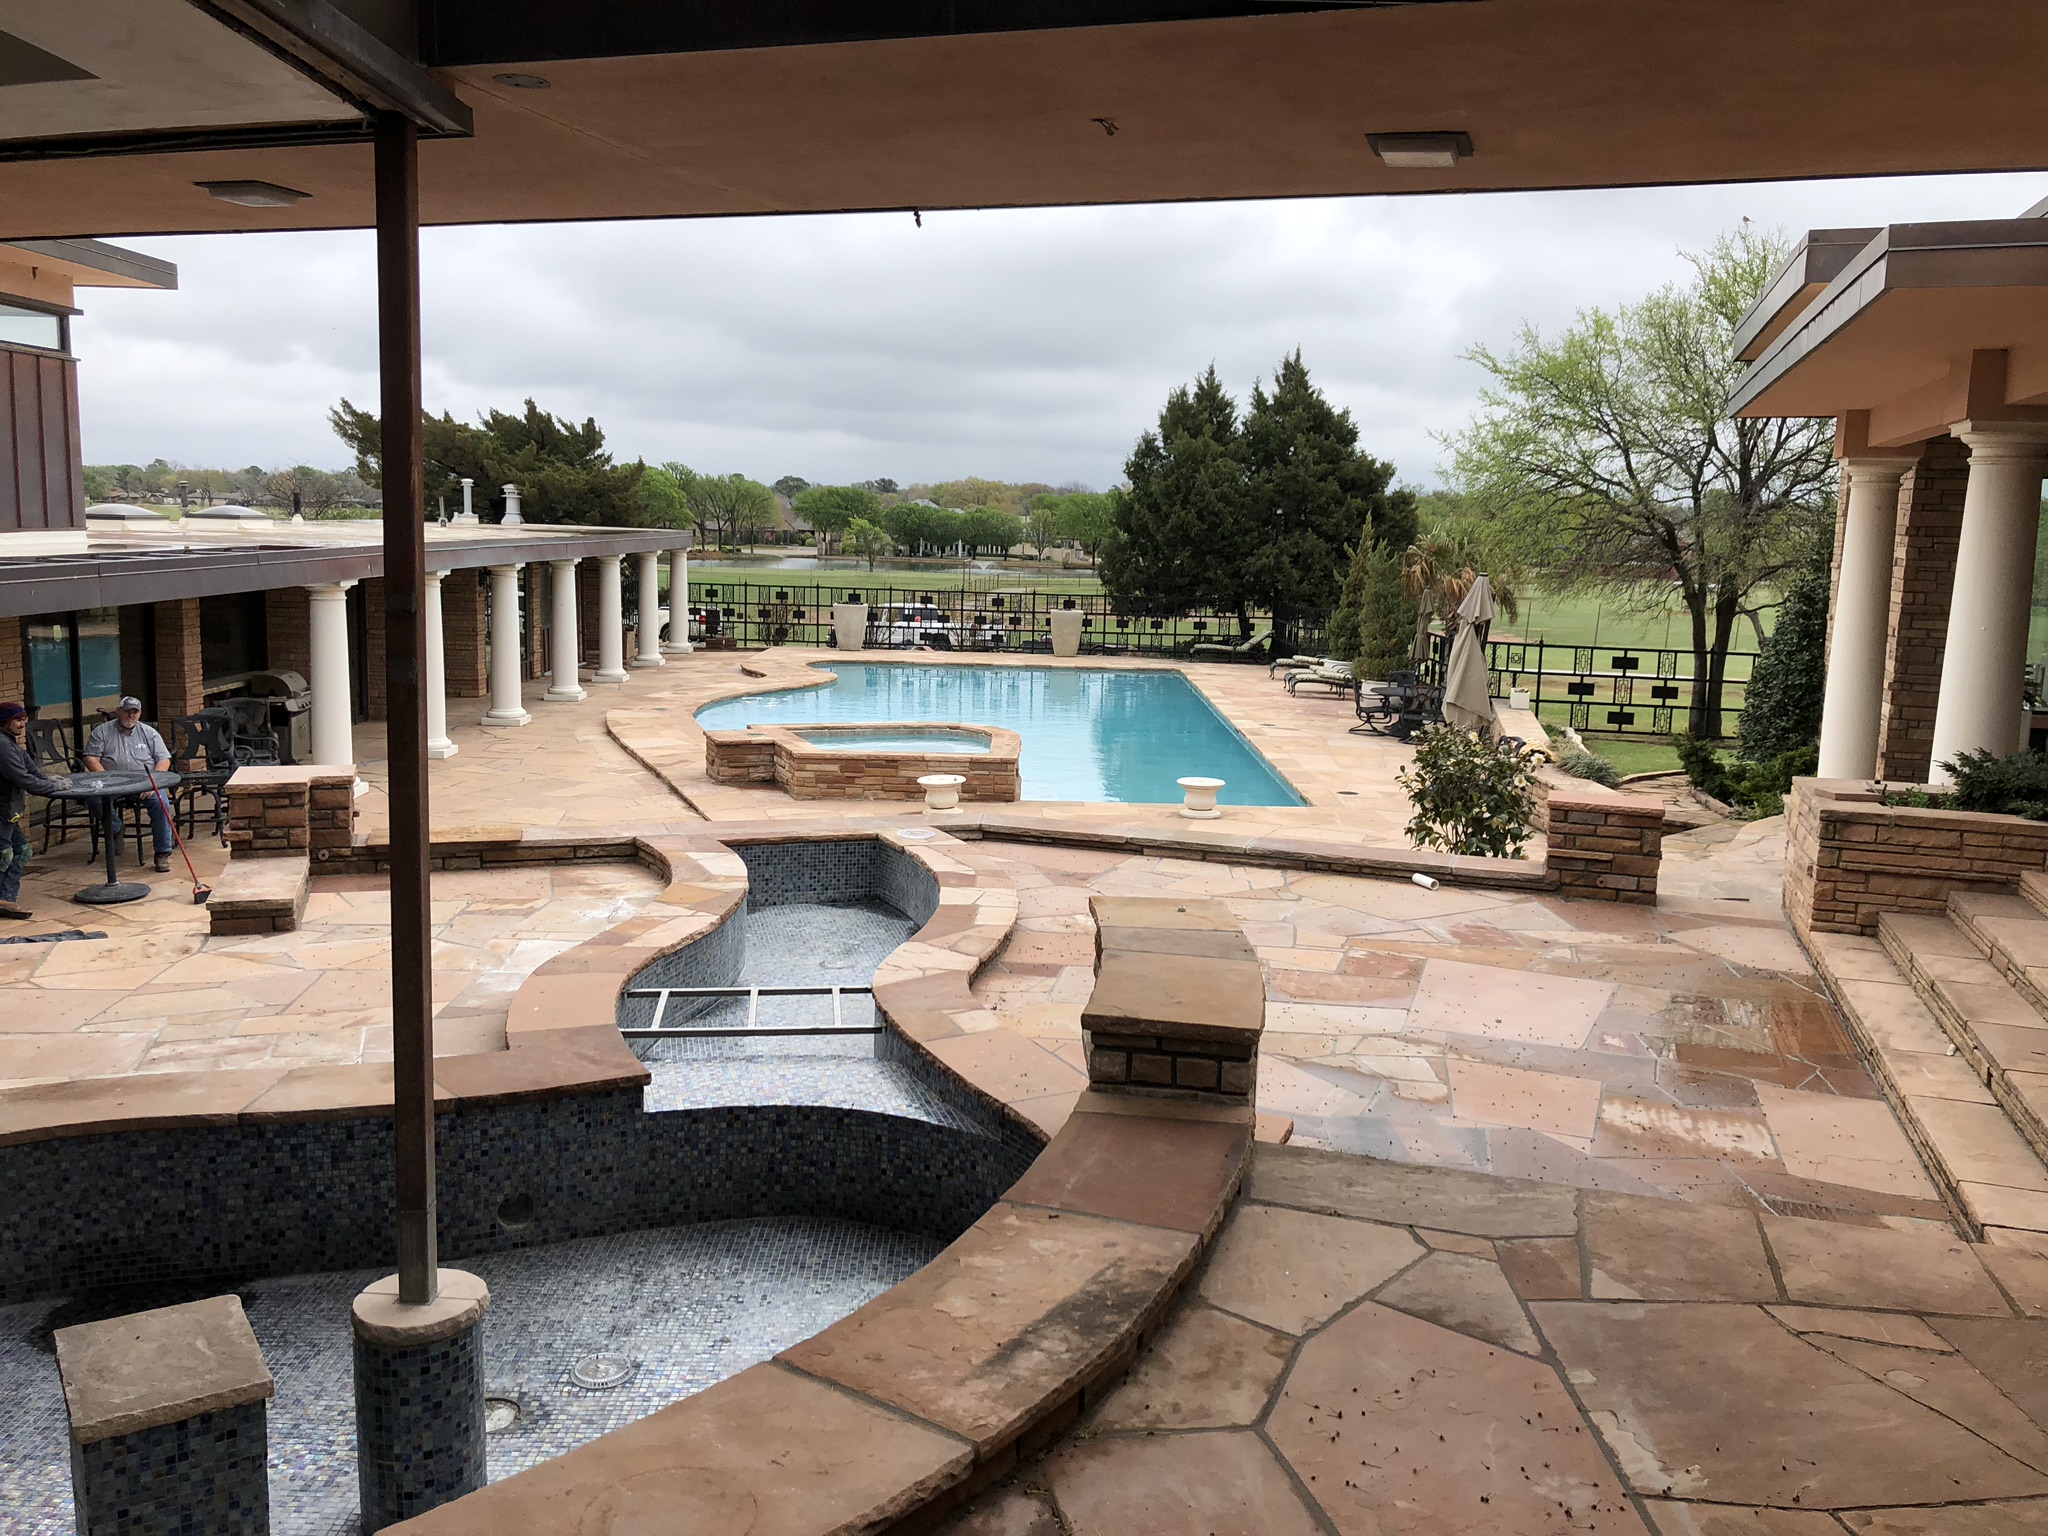 Here is one last look at this gorgeous backyard setting. As you can see from this image, there are going to be two elevated water features that run down to our pool. These water features will not be connected, but instead will have a catch basin and run on their own closed plumbing loop.